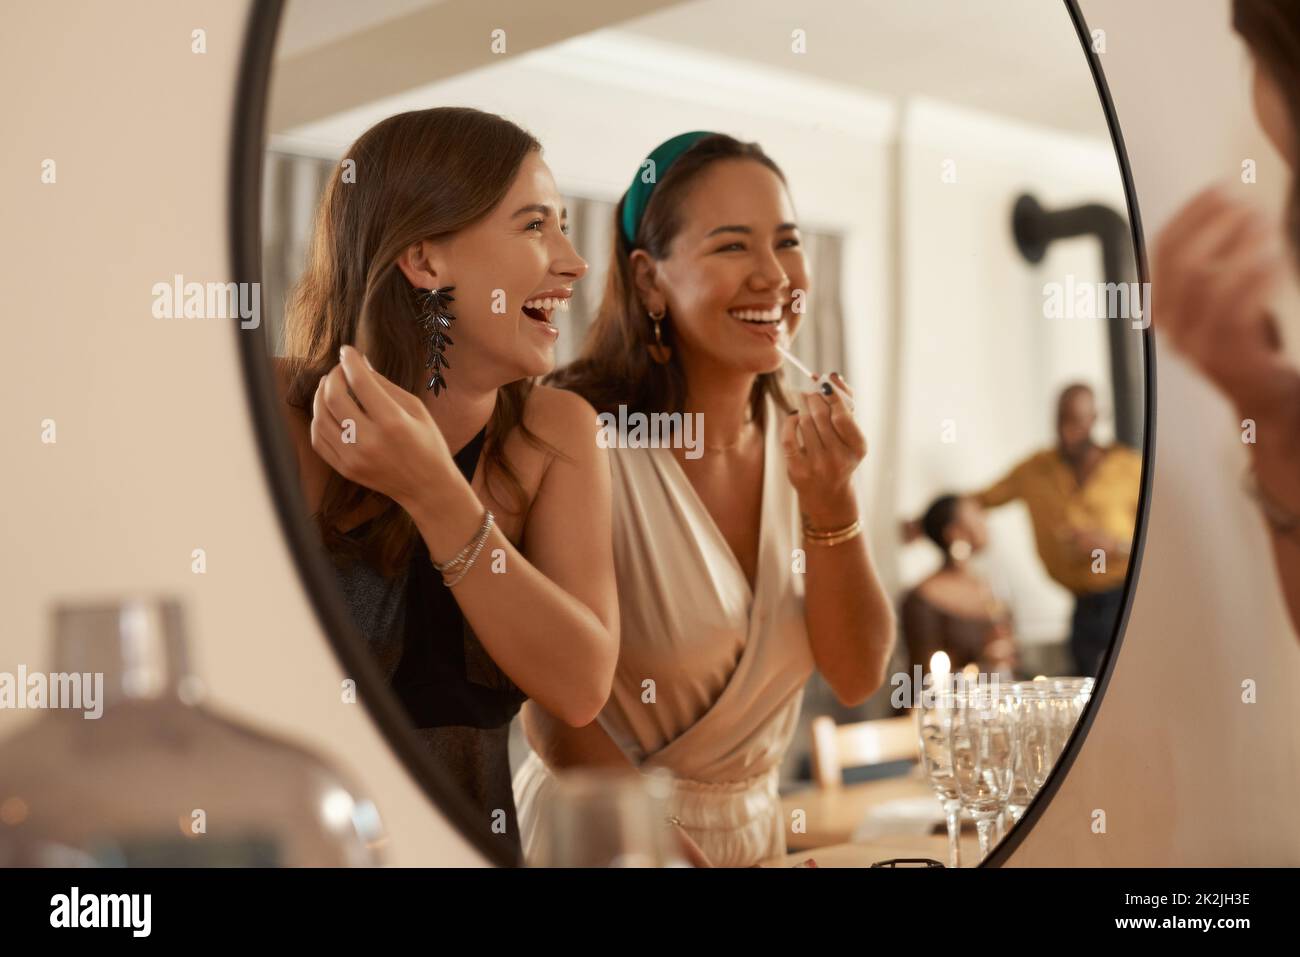 We always have a joke prepared. Shot of two young friends standing together and using a mirror to touch up their makeup at a dinner party. Stock Photo